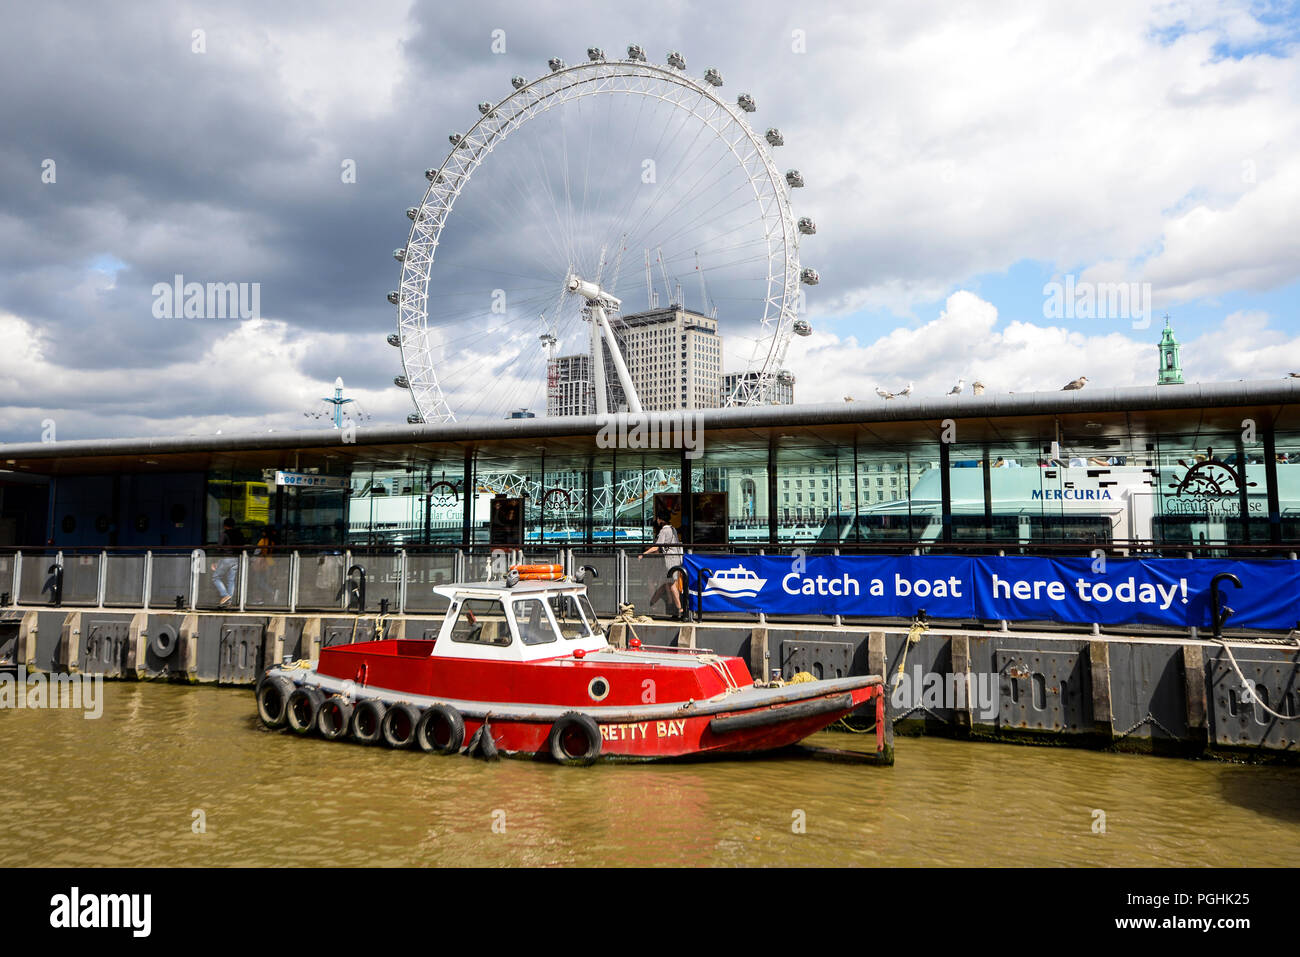 Westminster Pier jetty, Victoria Embankment, London, UK, on the River Thames. Small vessel Pretty Bay and London Eye Millennium Wheel Stock Photo